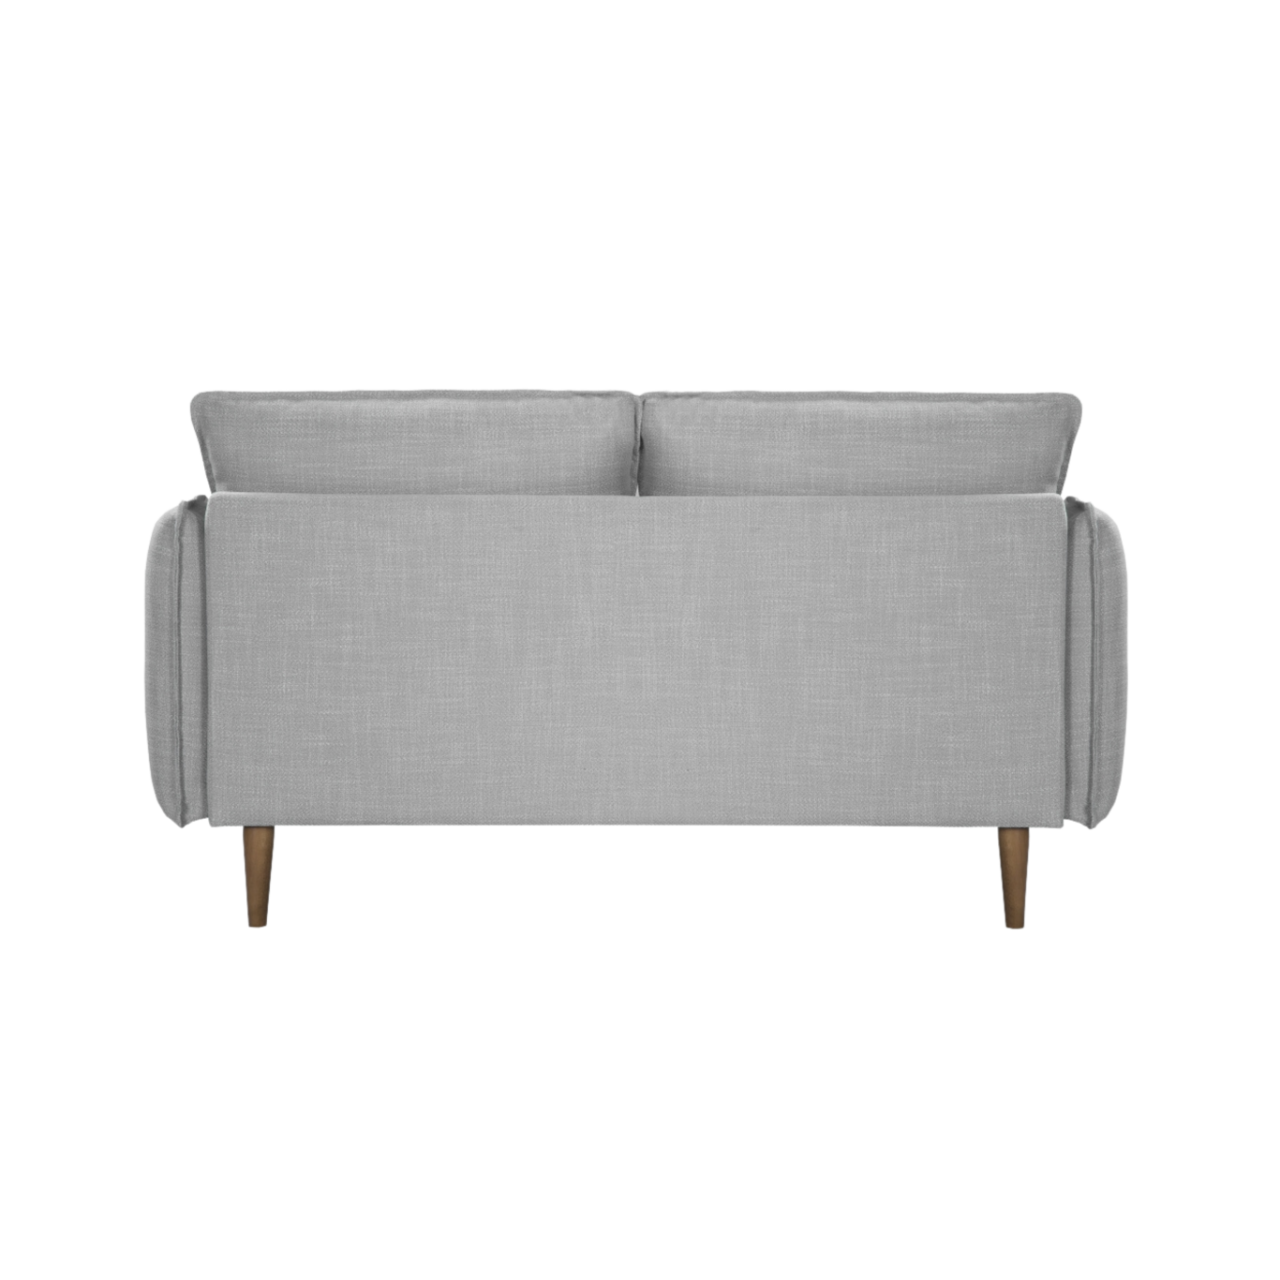 back view of Simple, modern 2 seater sofa upholstered in grey linen fabric